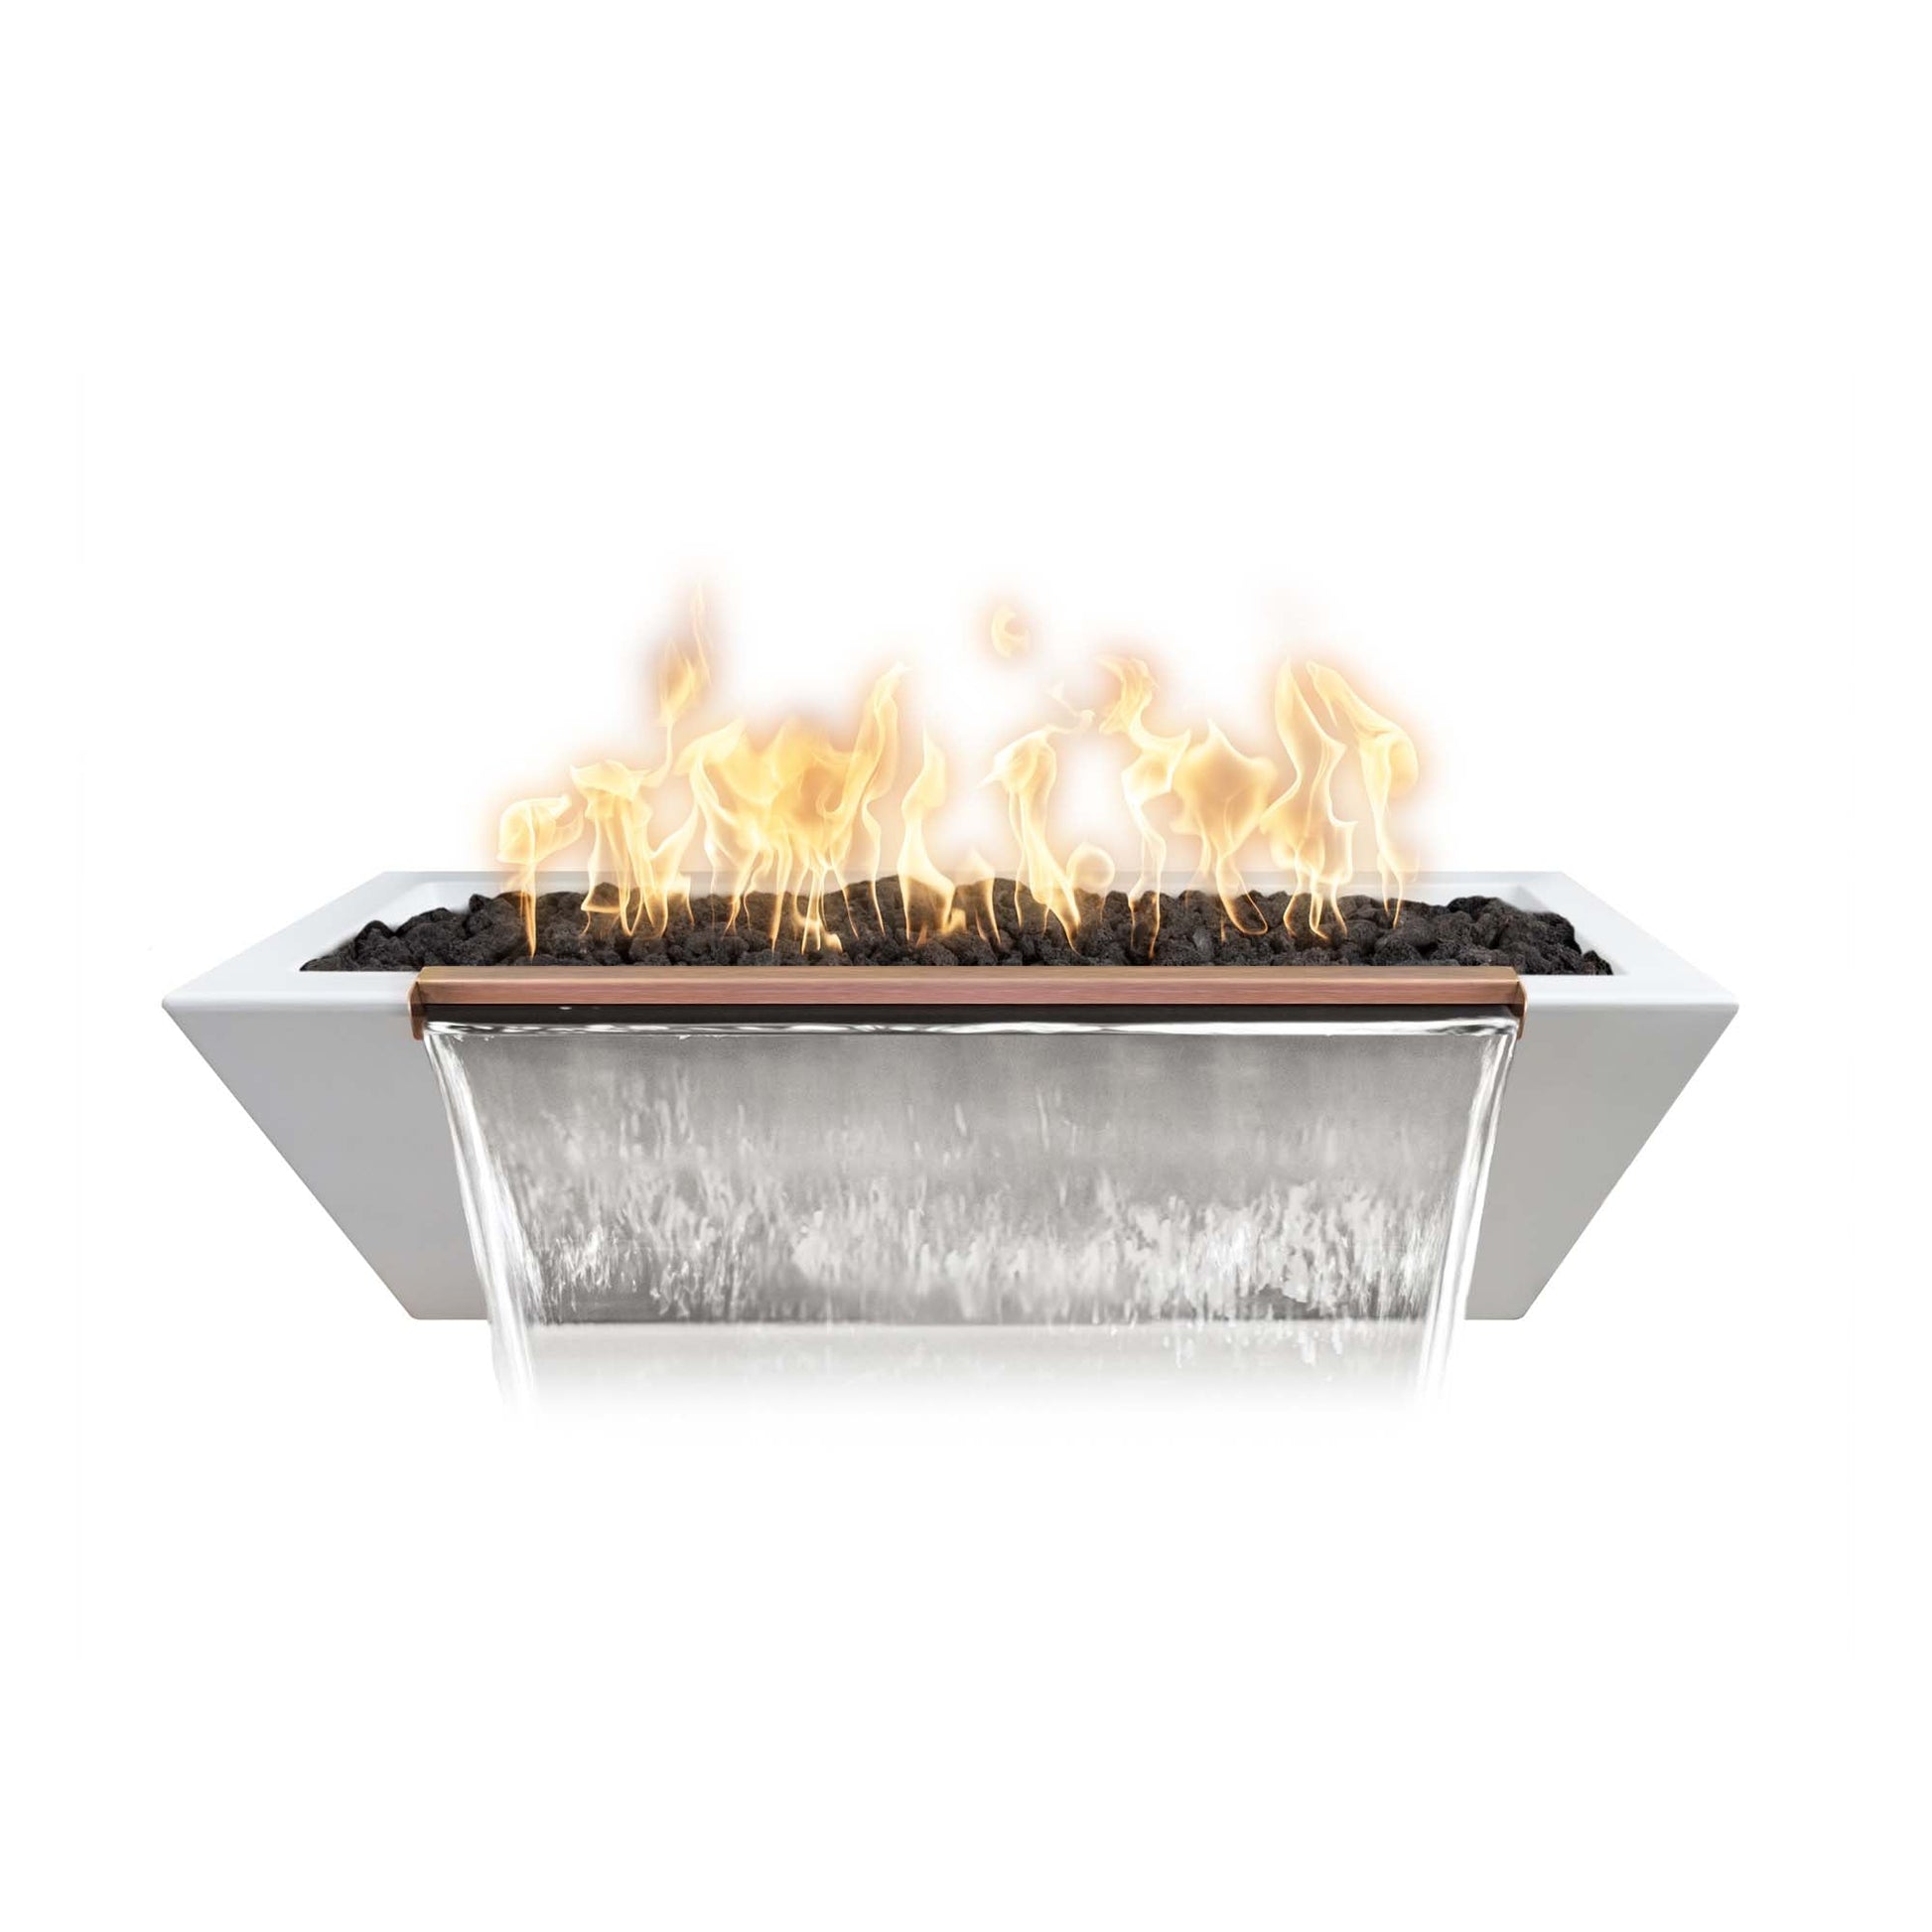 The Outdoor Plus Linear Maya 60" Rustic Coffee GFRC Concrete Natural Gas Fire & Water Bowl with 12V Electronic Ignition